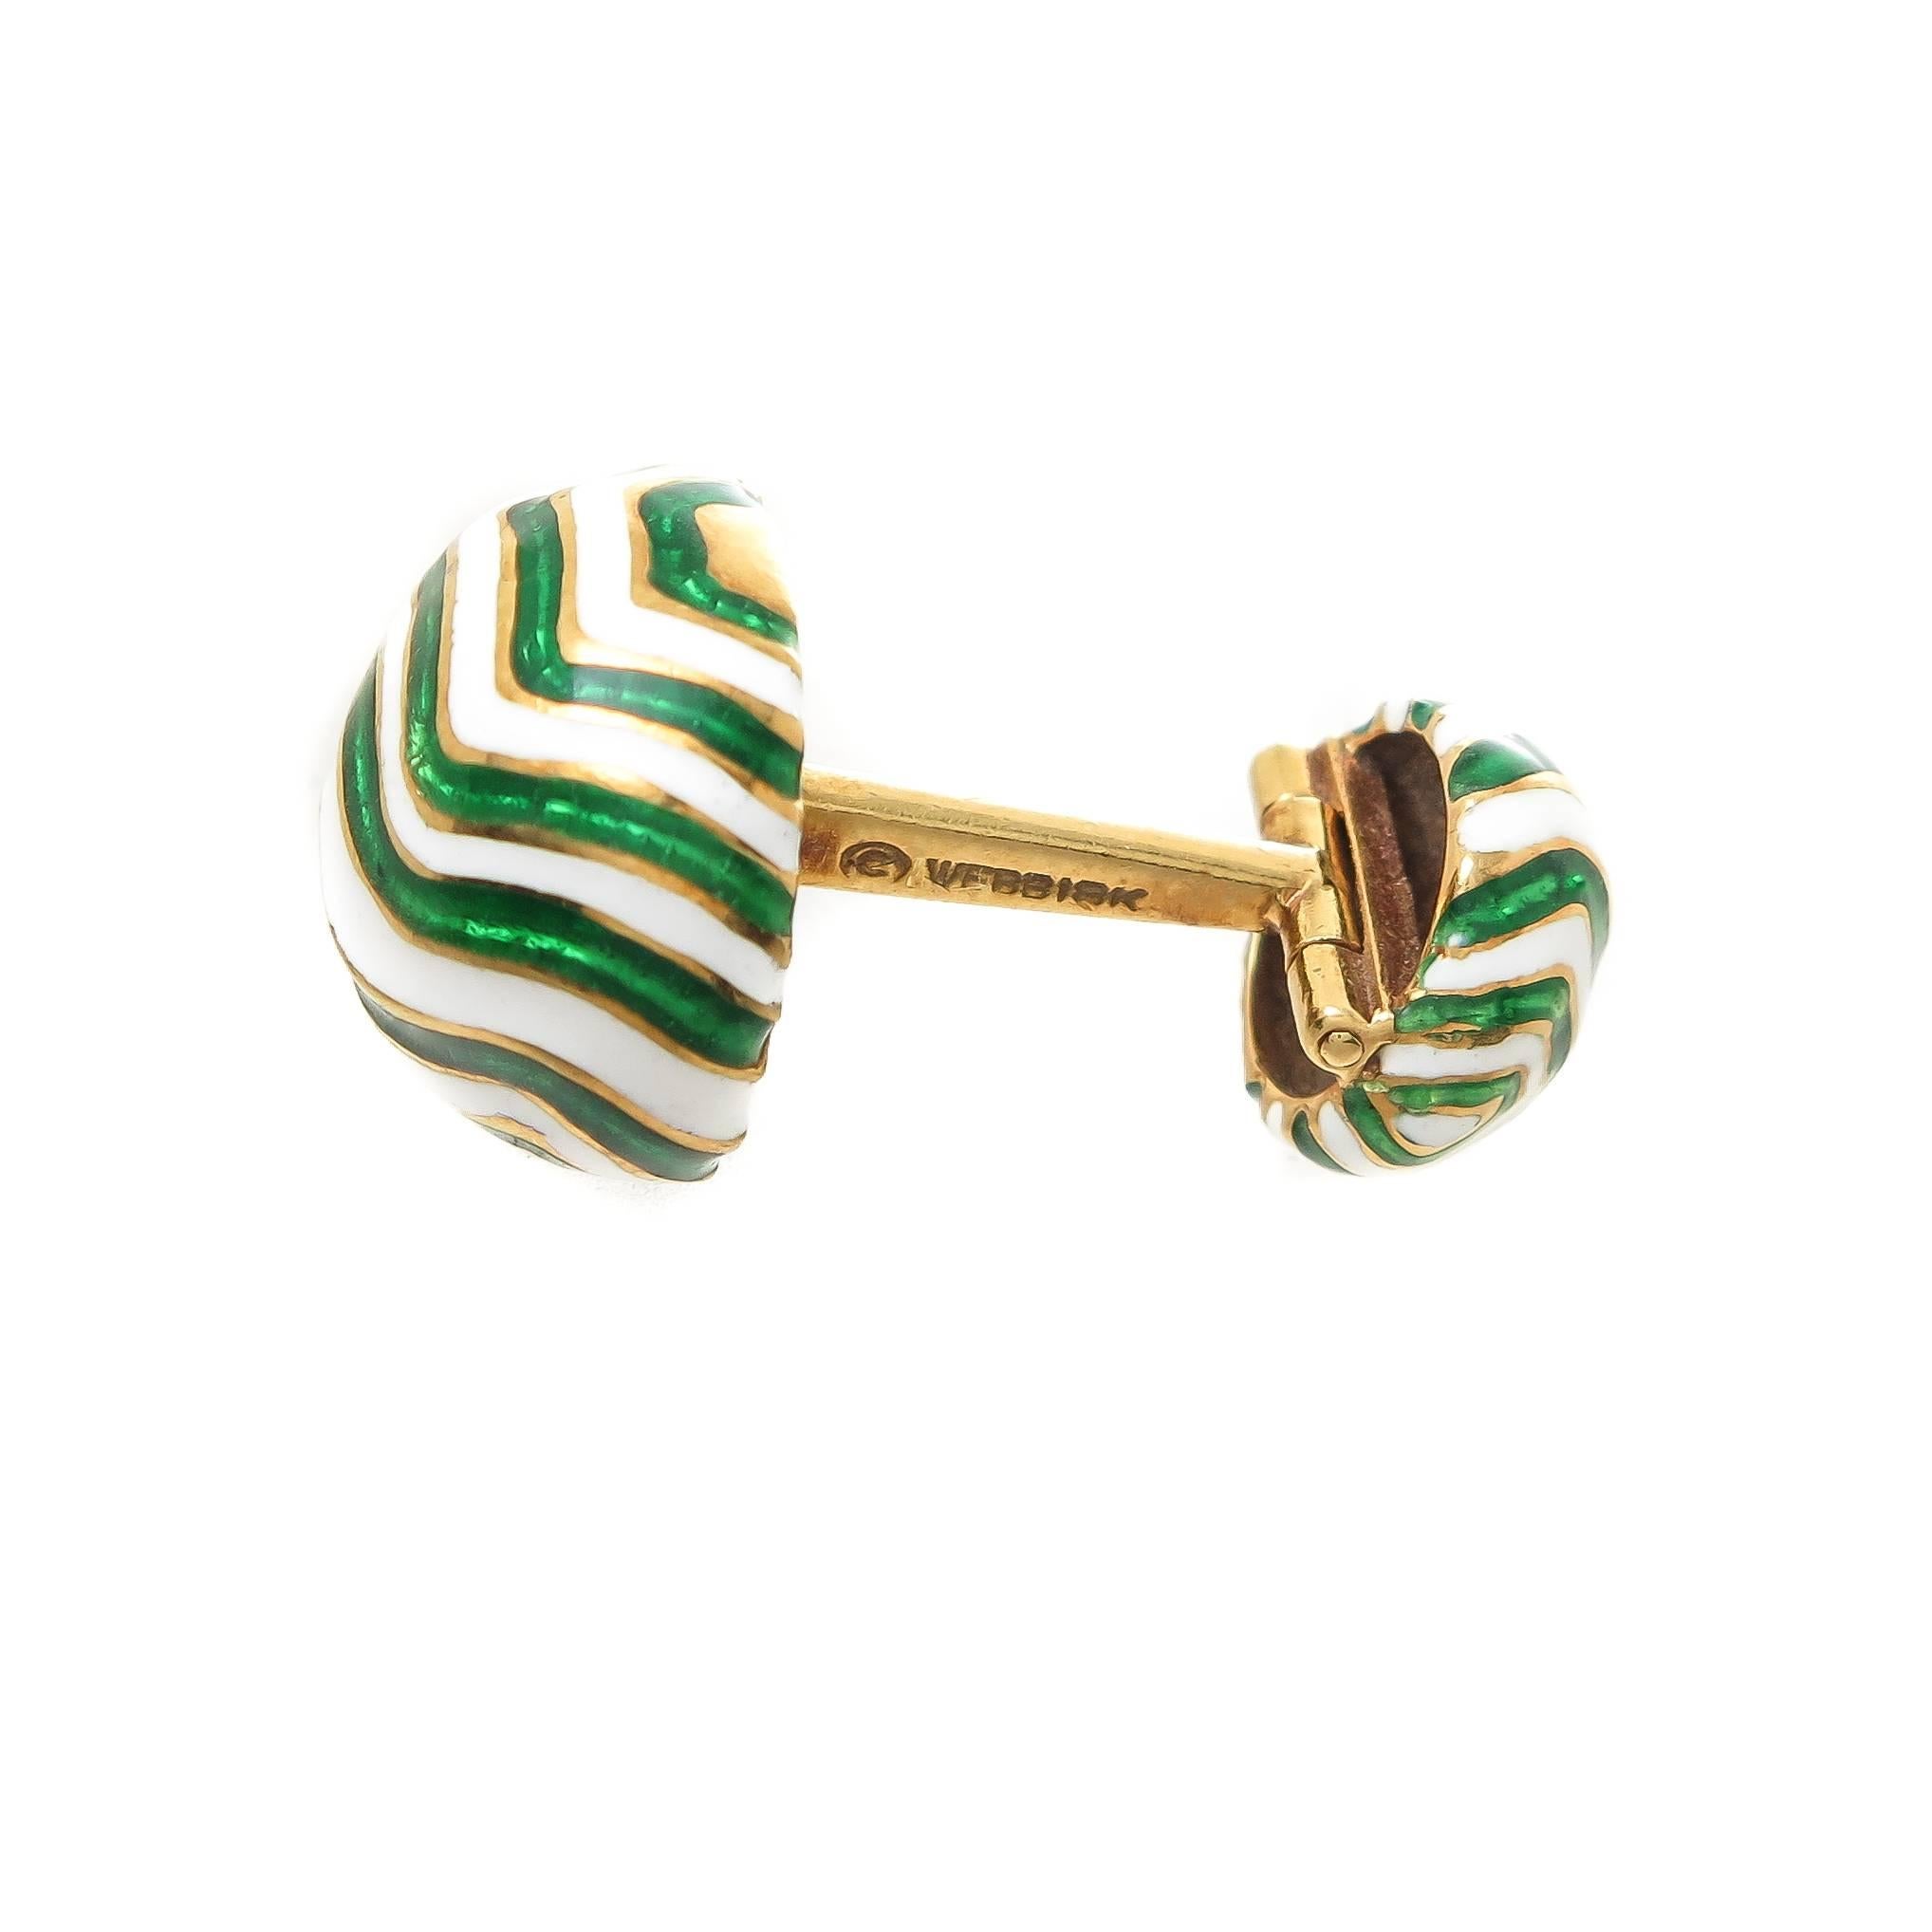 Circa 1990 David Webb Classic Cufflinks, 18K Yellow Gold and measuring 5/8 X 5/8 inch across the top, finished in bright White and Green enamel. Easy to put on and take off mechanism.